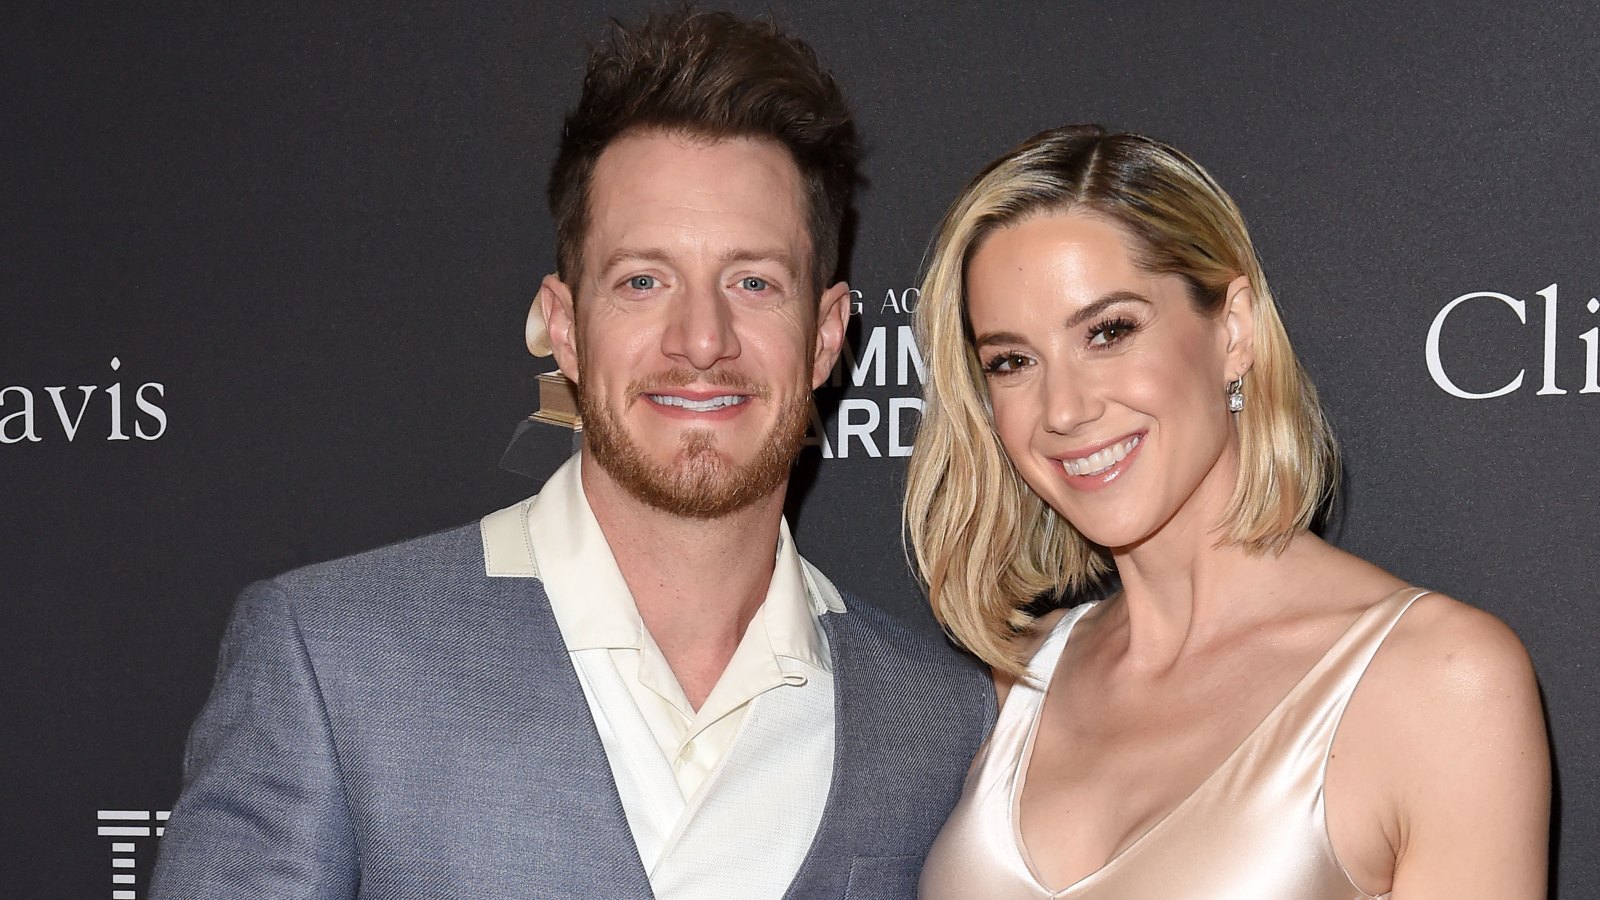 Florida Georgia Line's Tyler Hubbard and Wife Hayley Are Expecting Their Second Child